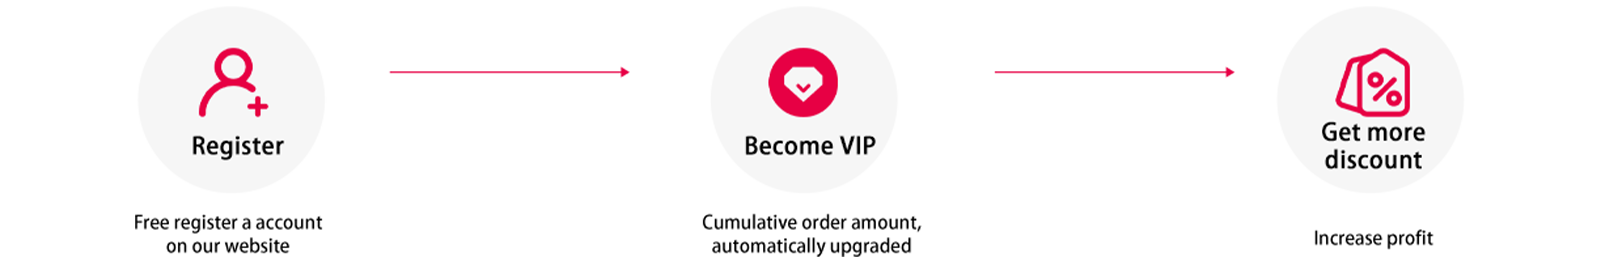 How to become VIP